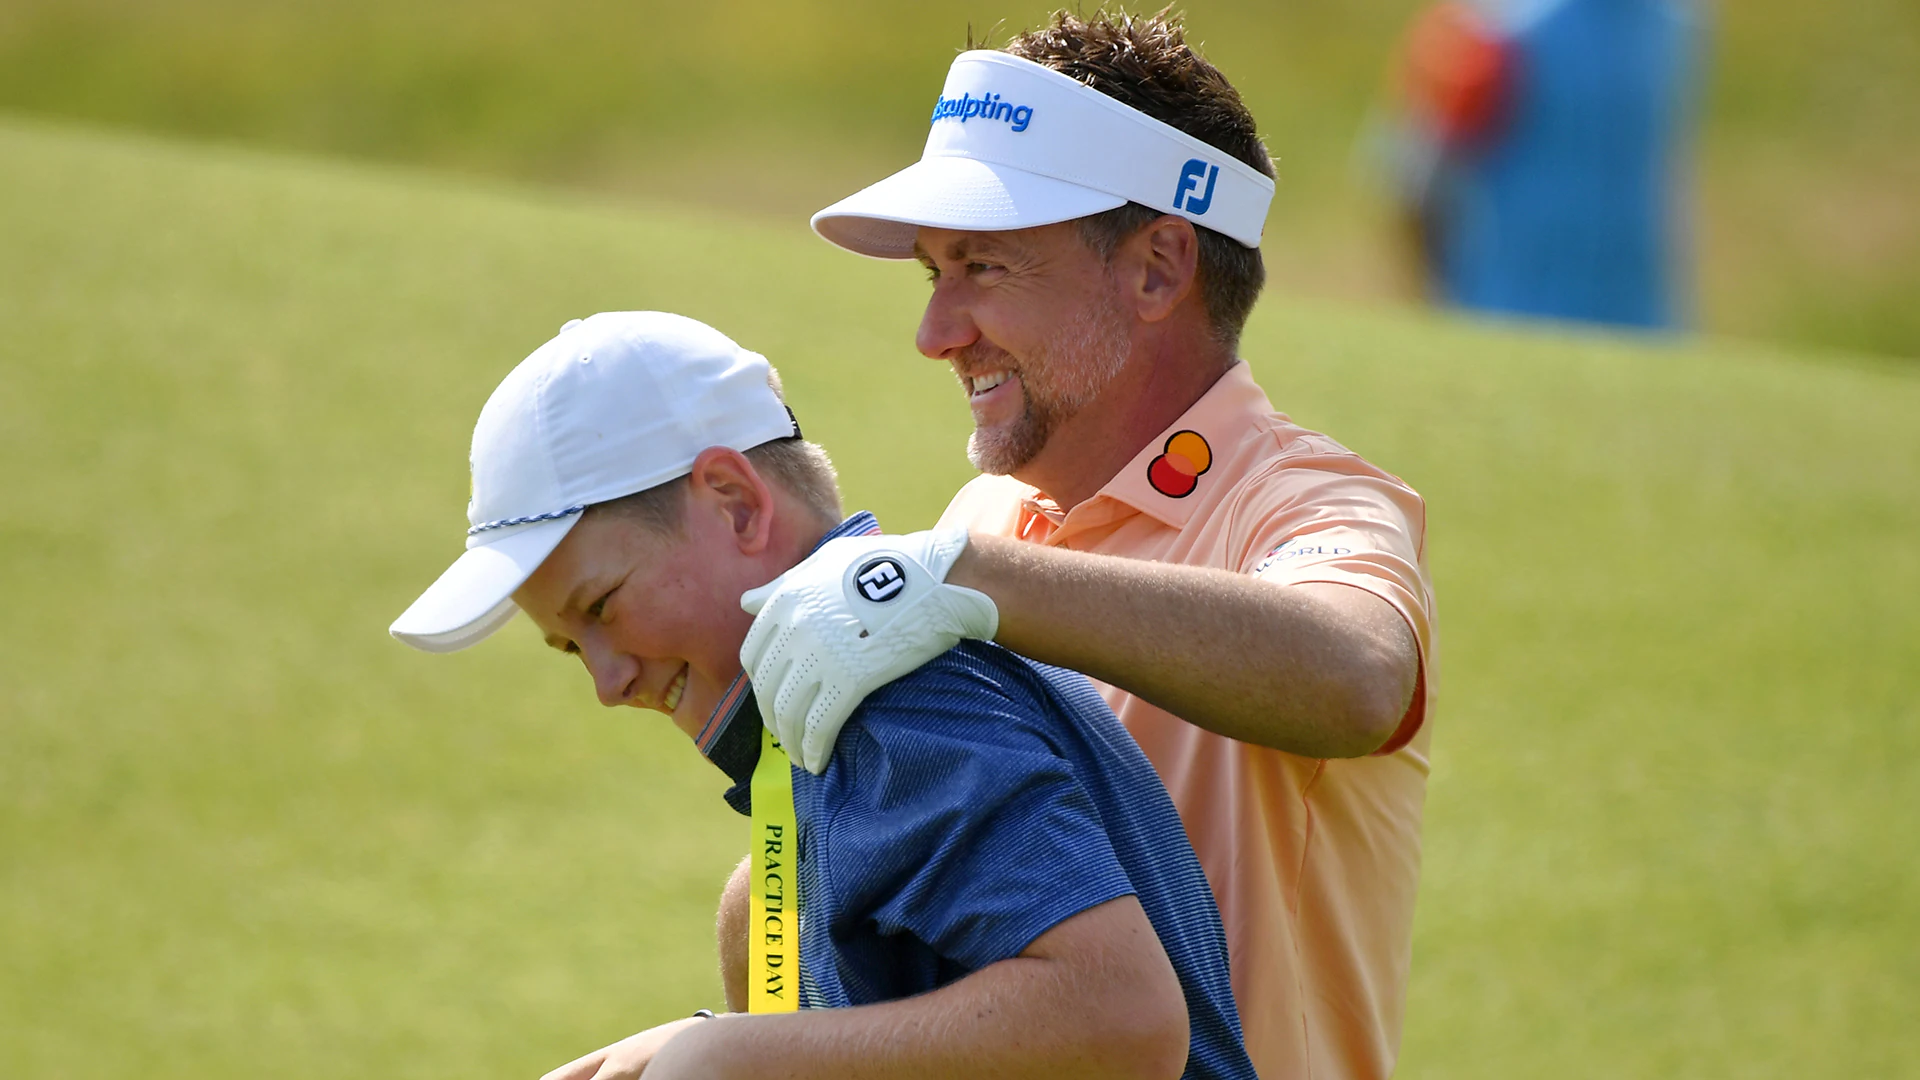 Ian Poulter’s son, Luke, to caddie for father at Wells Fargo